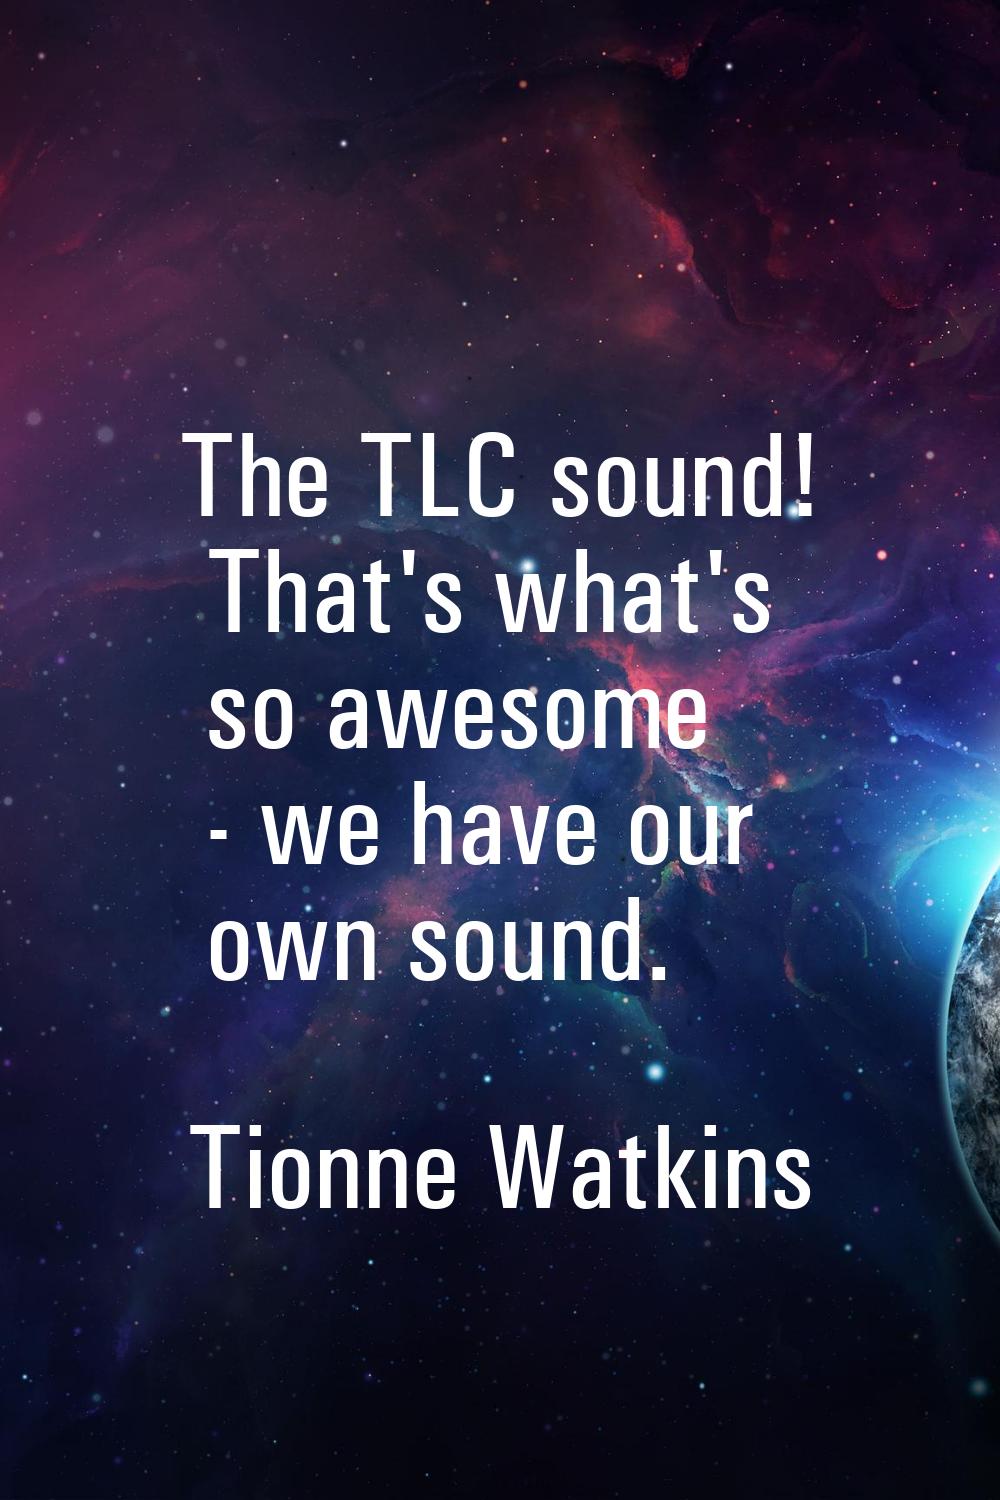 The TLC sound! That's what's so awesome - we have our own sound.